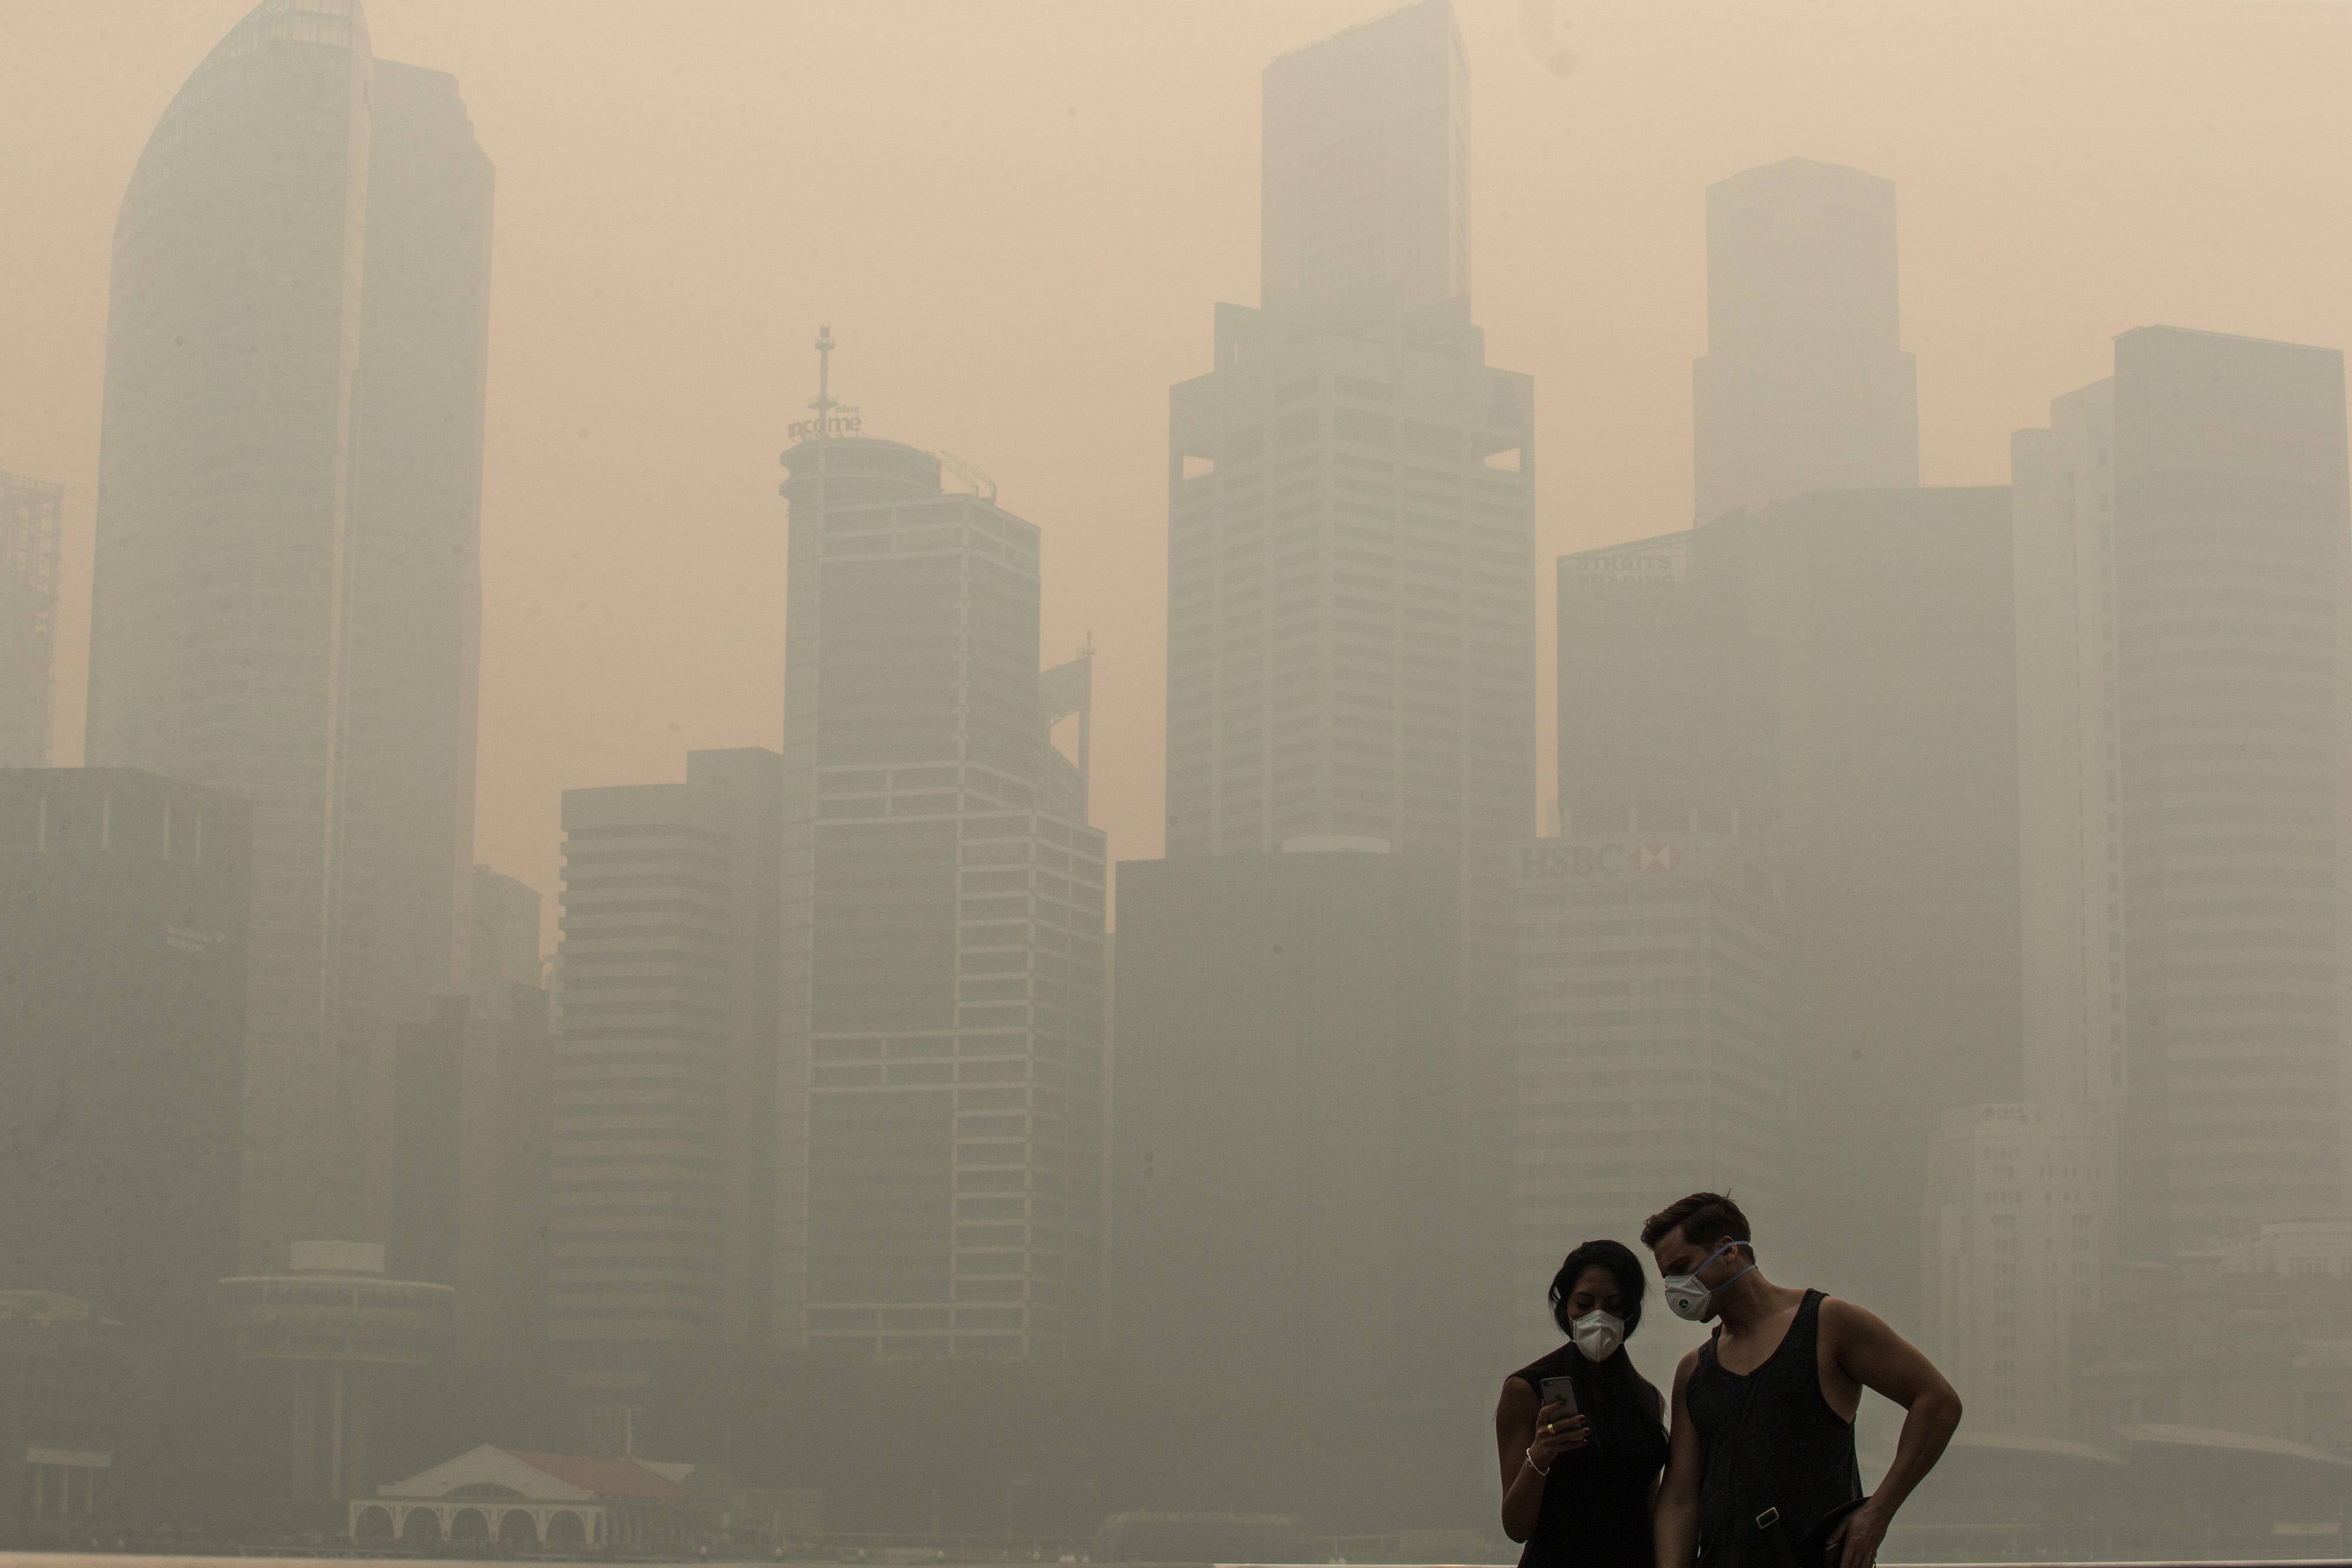 Pedestrians look at a smart device in the Marina Bay district as buildings in the central business district stand shrouded in smog in Singapore, on Sept. 24, 2015. (Nicky Loh—Bloomberg/Getty Images)